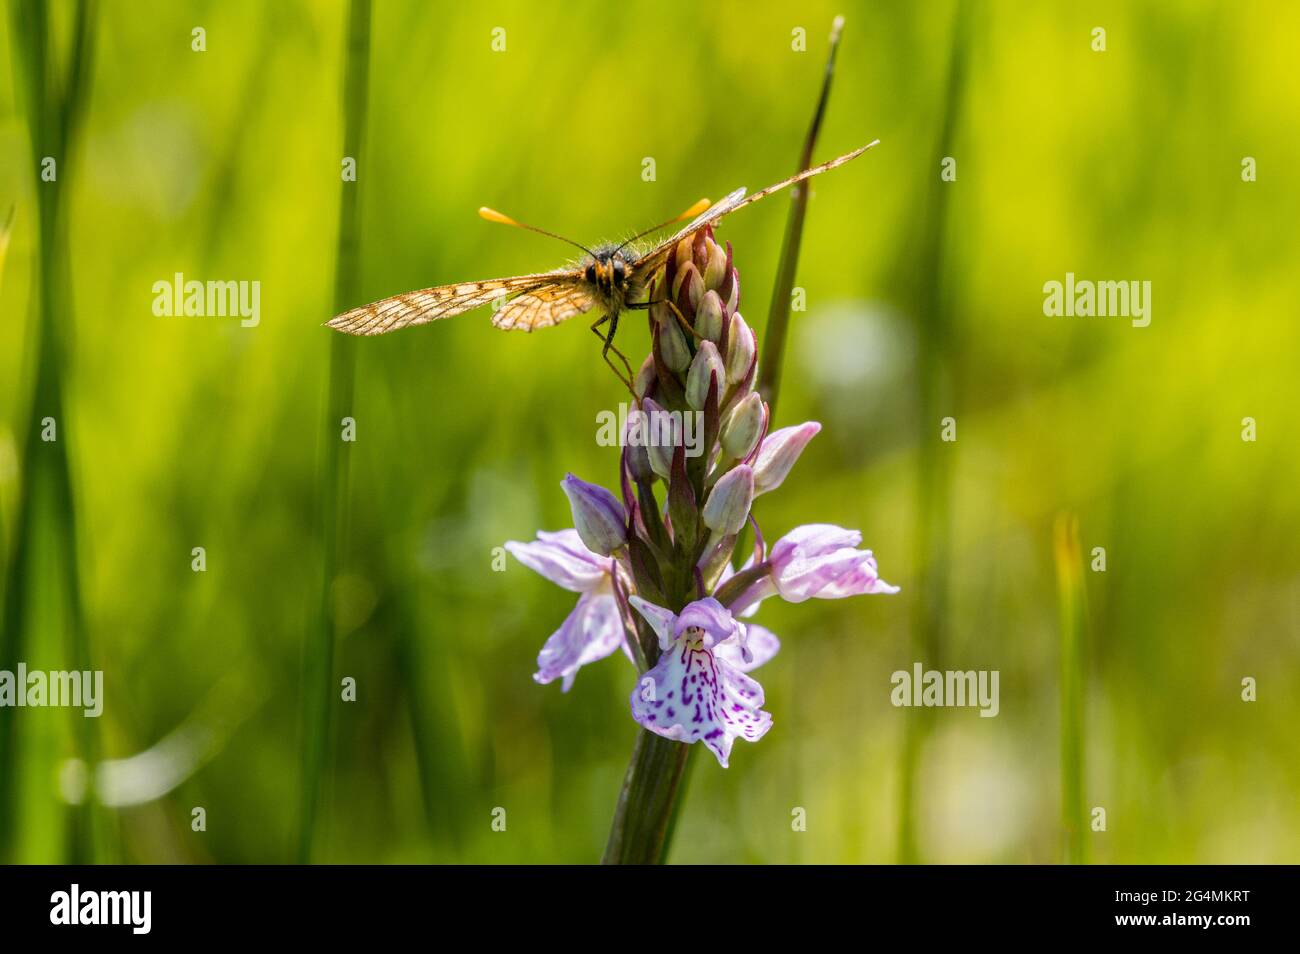 Marsh fritillary butterfly resting on Heath spotted orchid Stock Photo